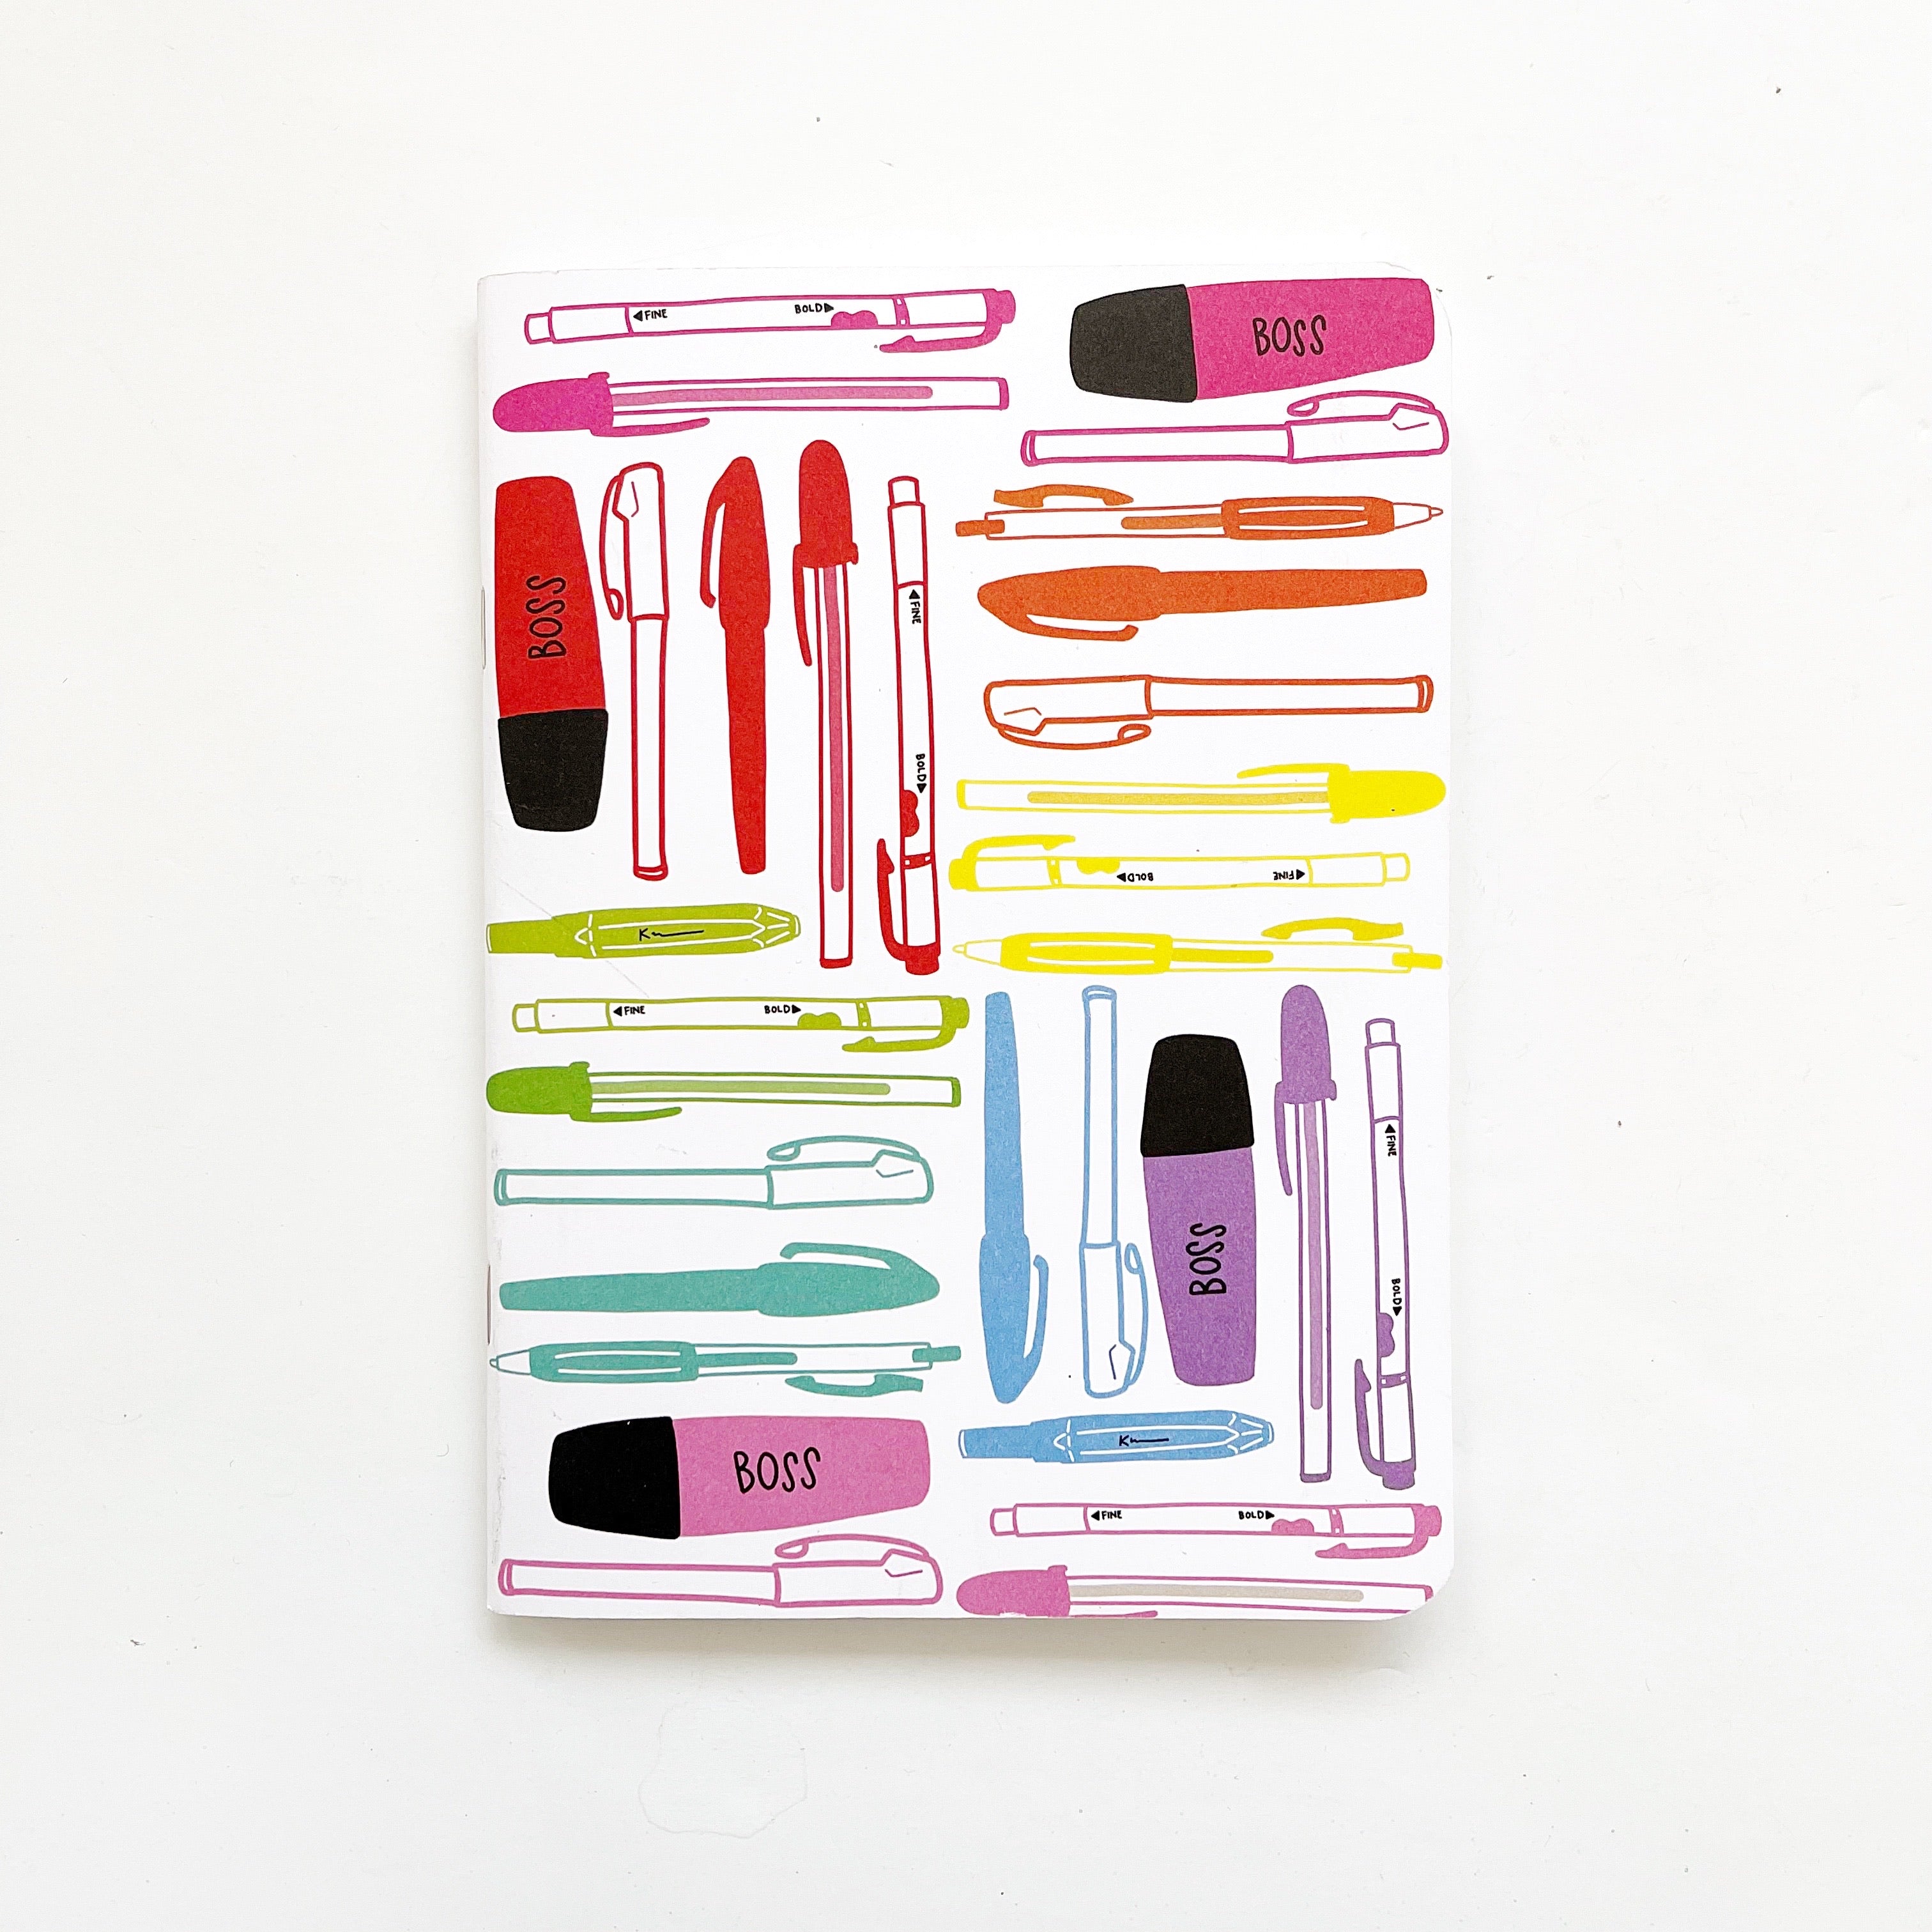 Image of notebook with white background and images of colorful pens and markers in rainbow colors. 